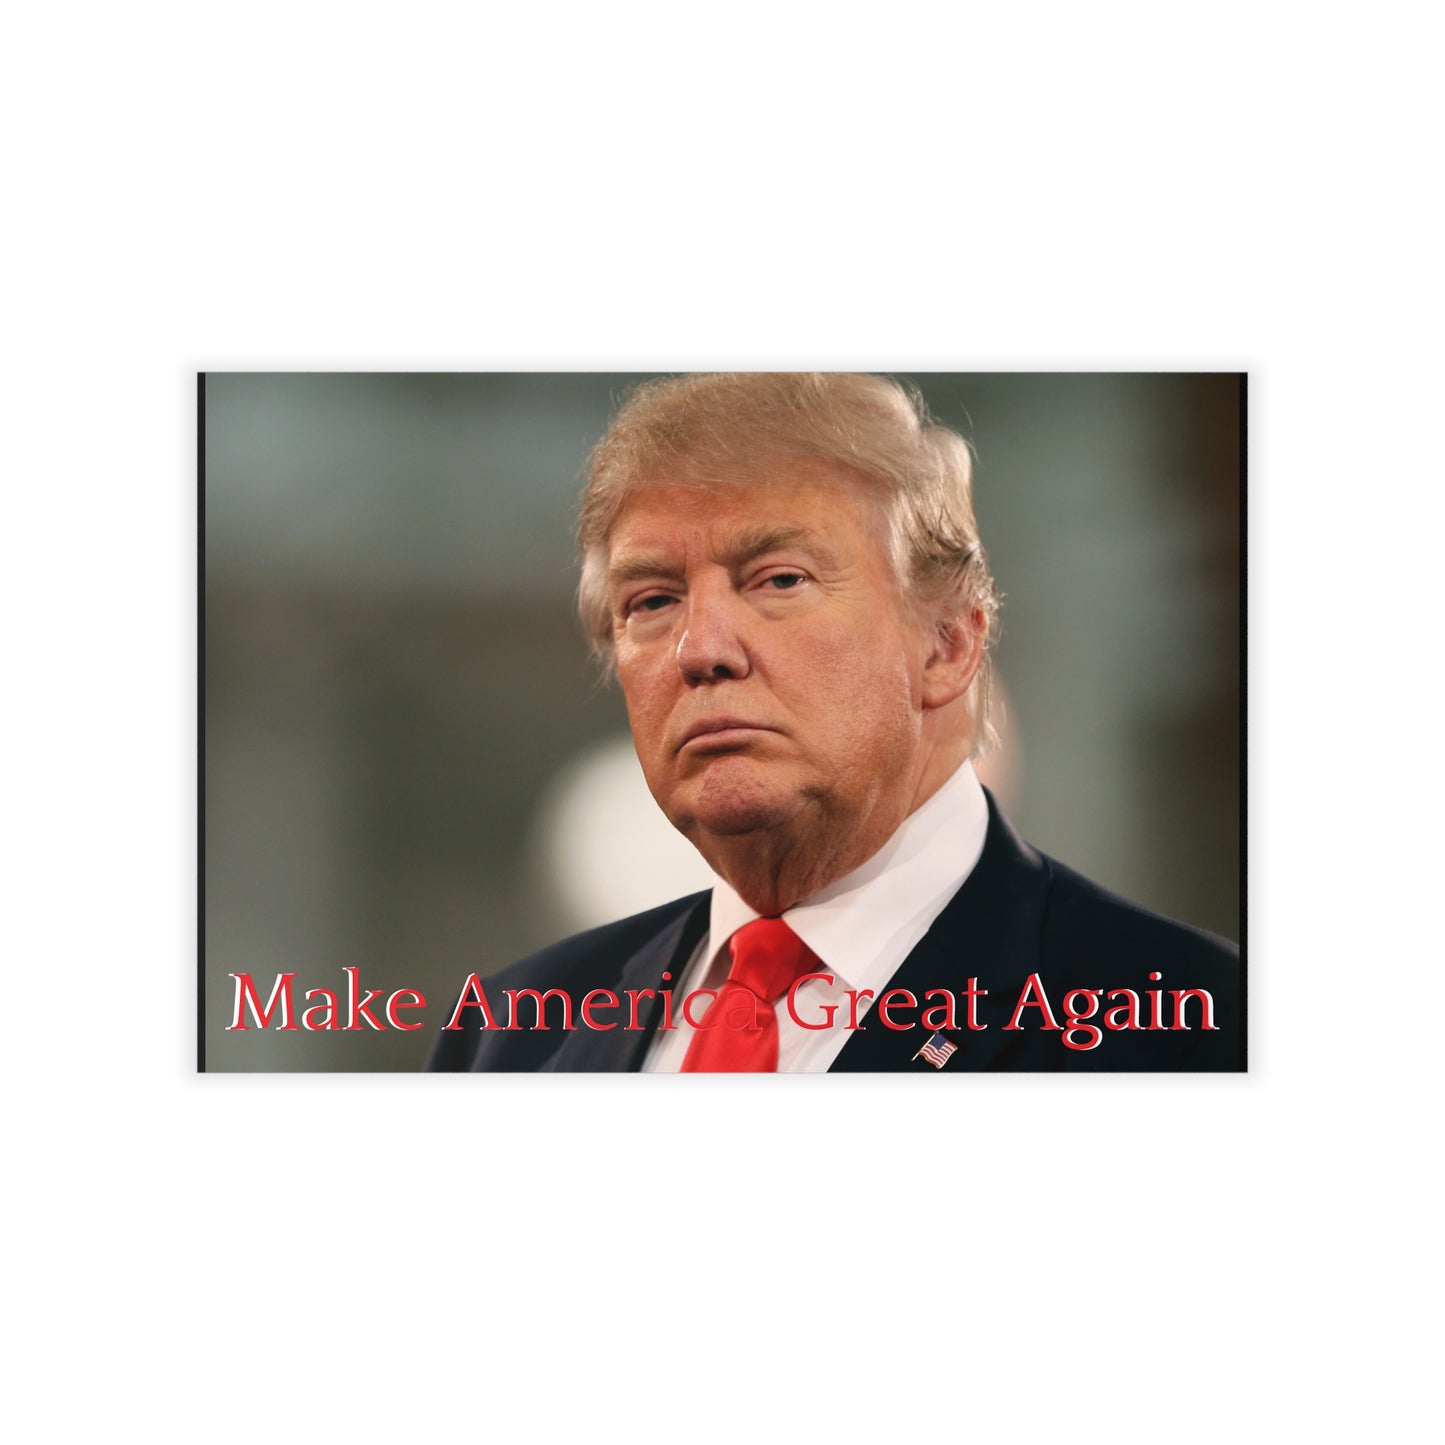 Make America Great Again MAGA Trump sticky Wall Decals 3 sizes